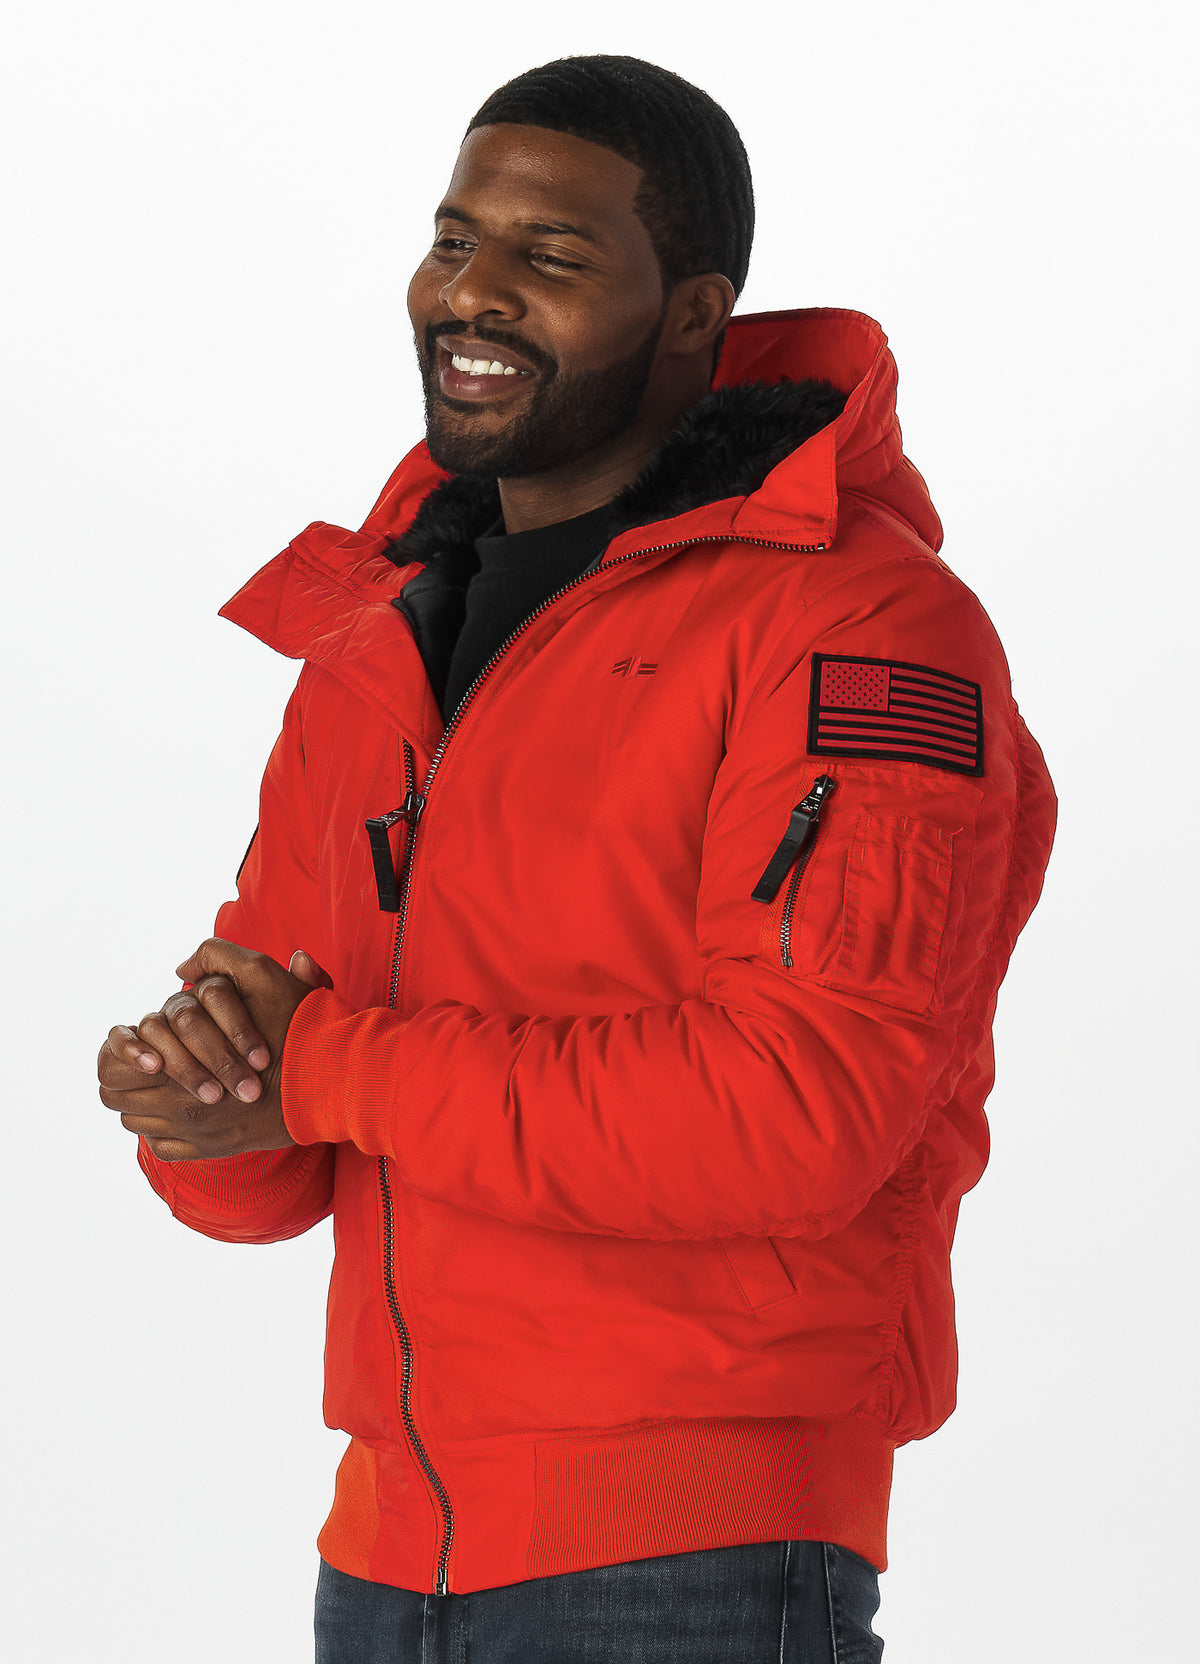 BEEJAY Flame Red Jacket.